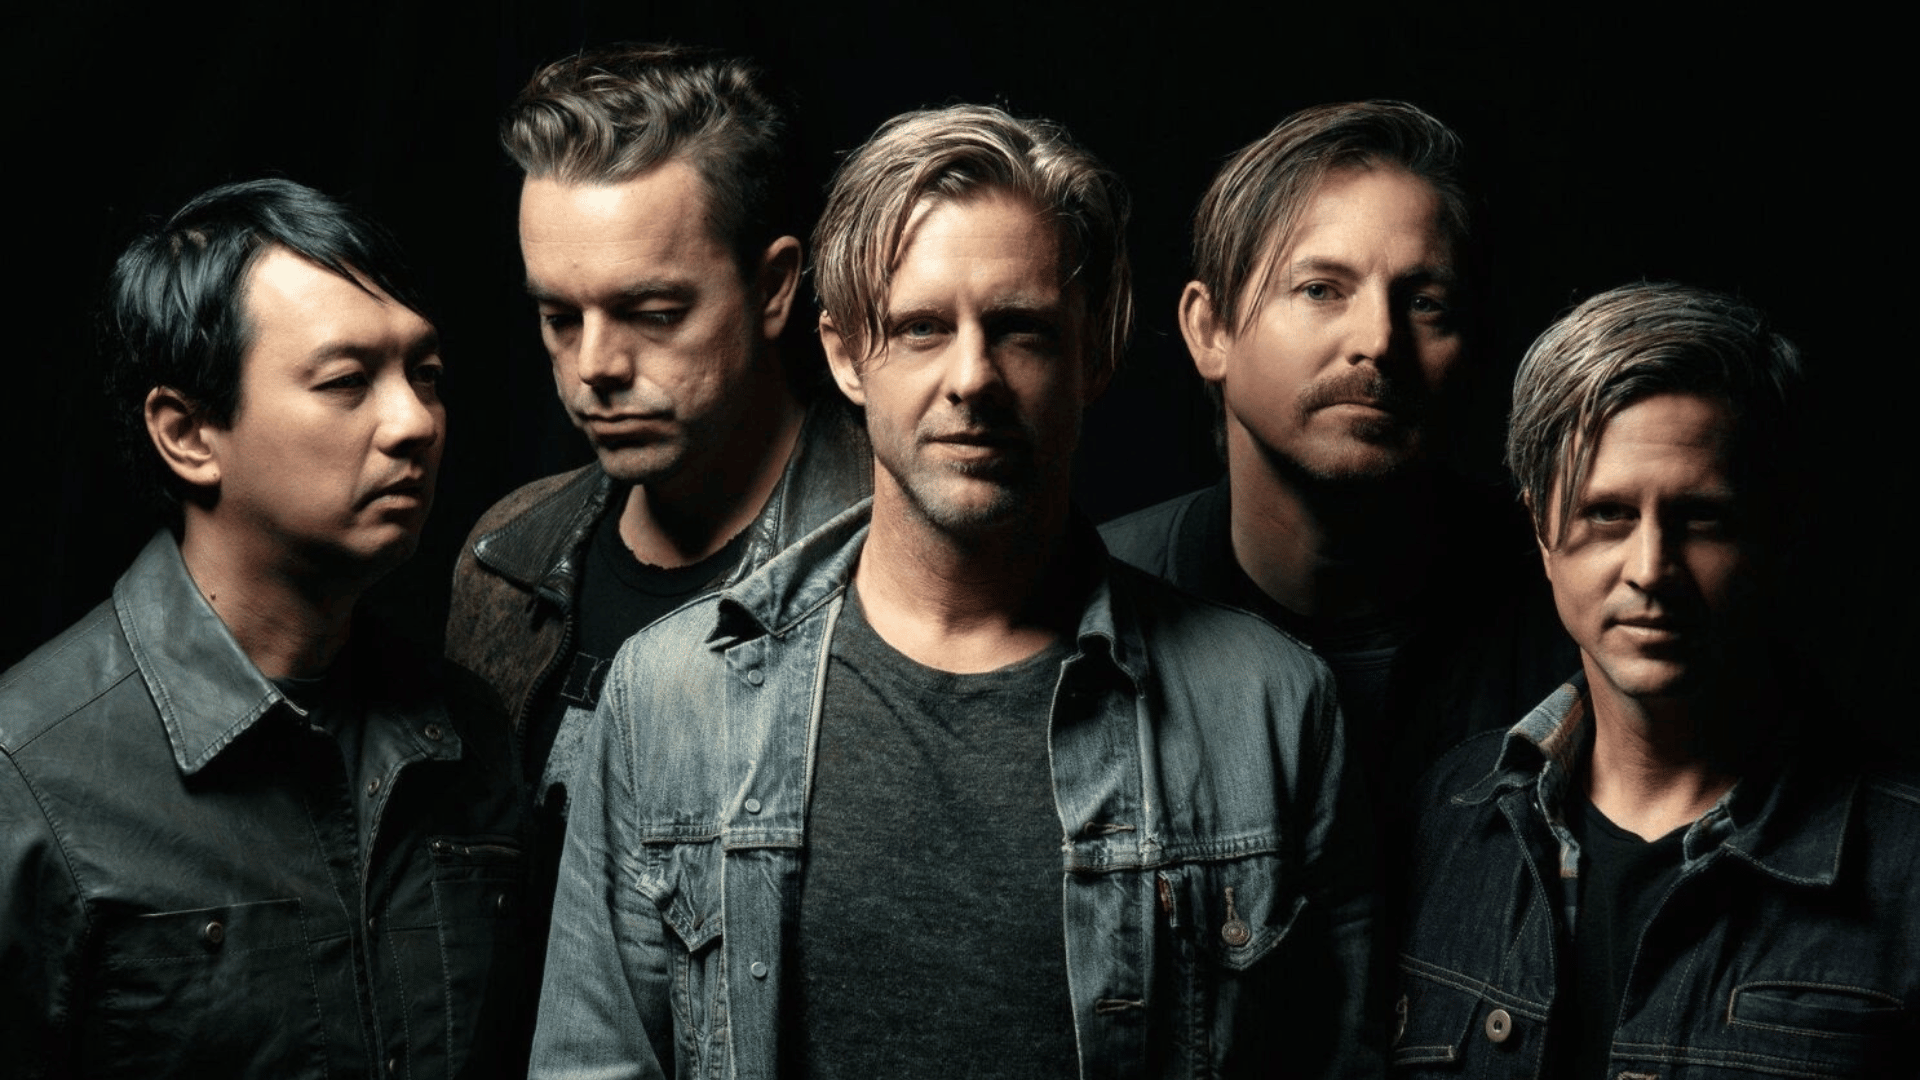 book Switchfoot band